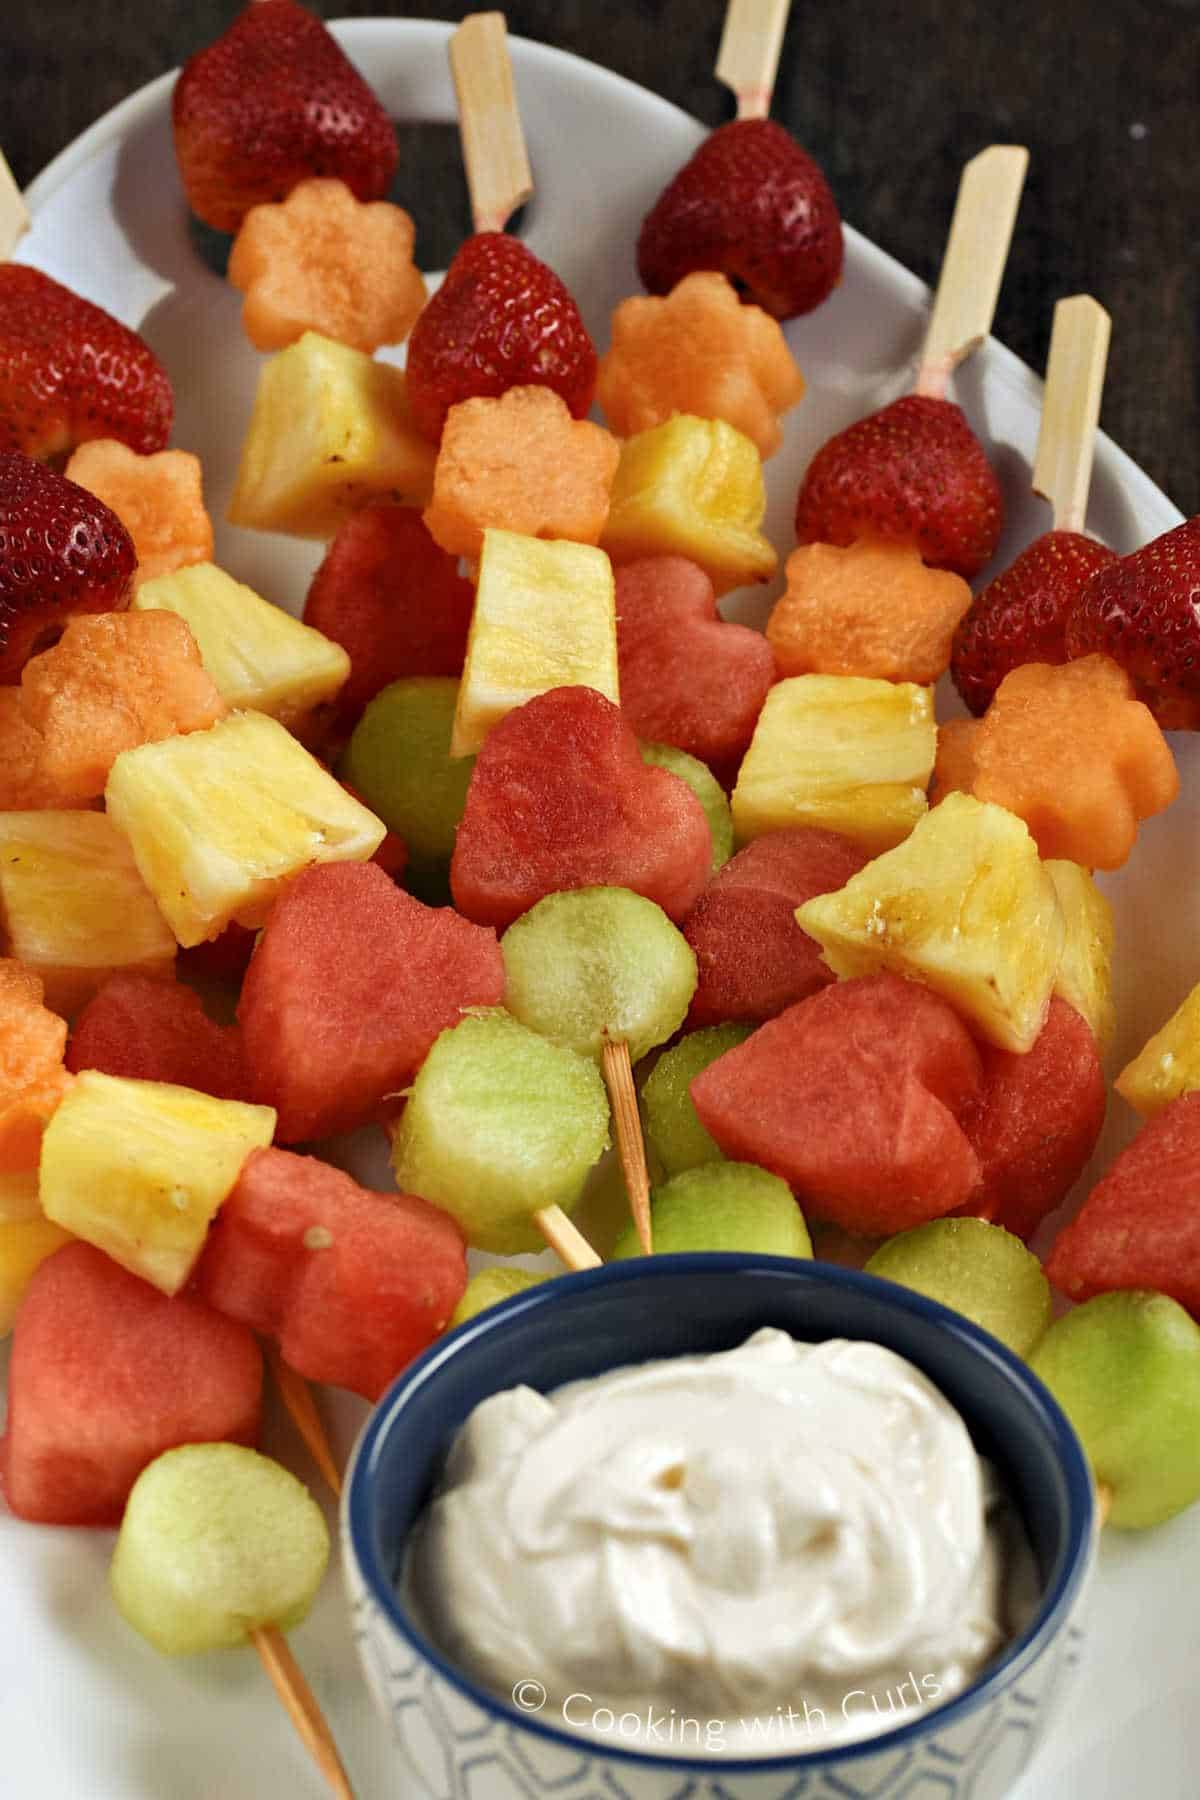 Close-up image of fresh fruits threaded onto wood skewers, stacked on an oval platter with a bowl of yogurt dip at the bottom.